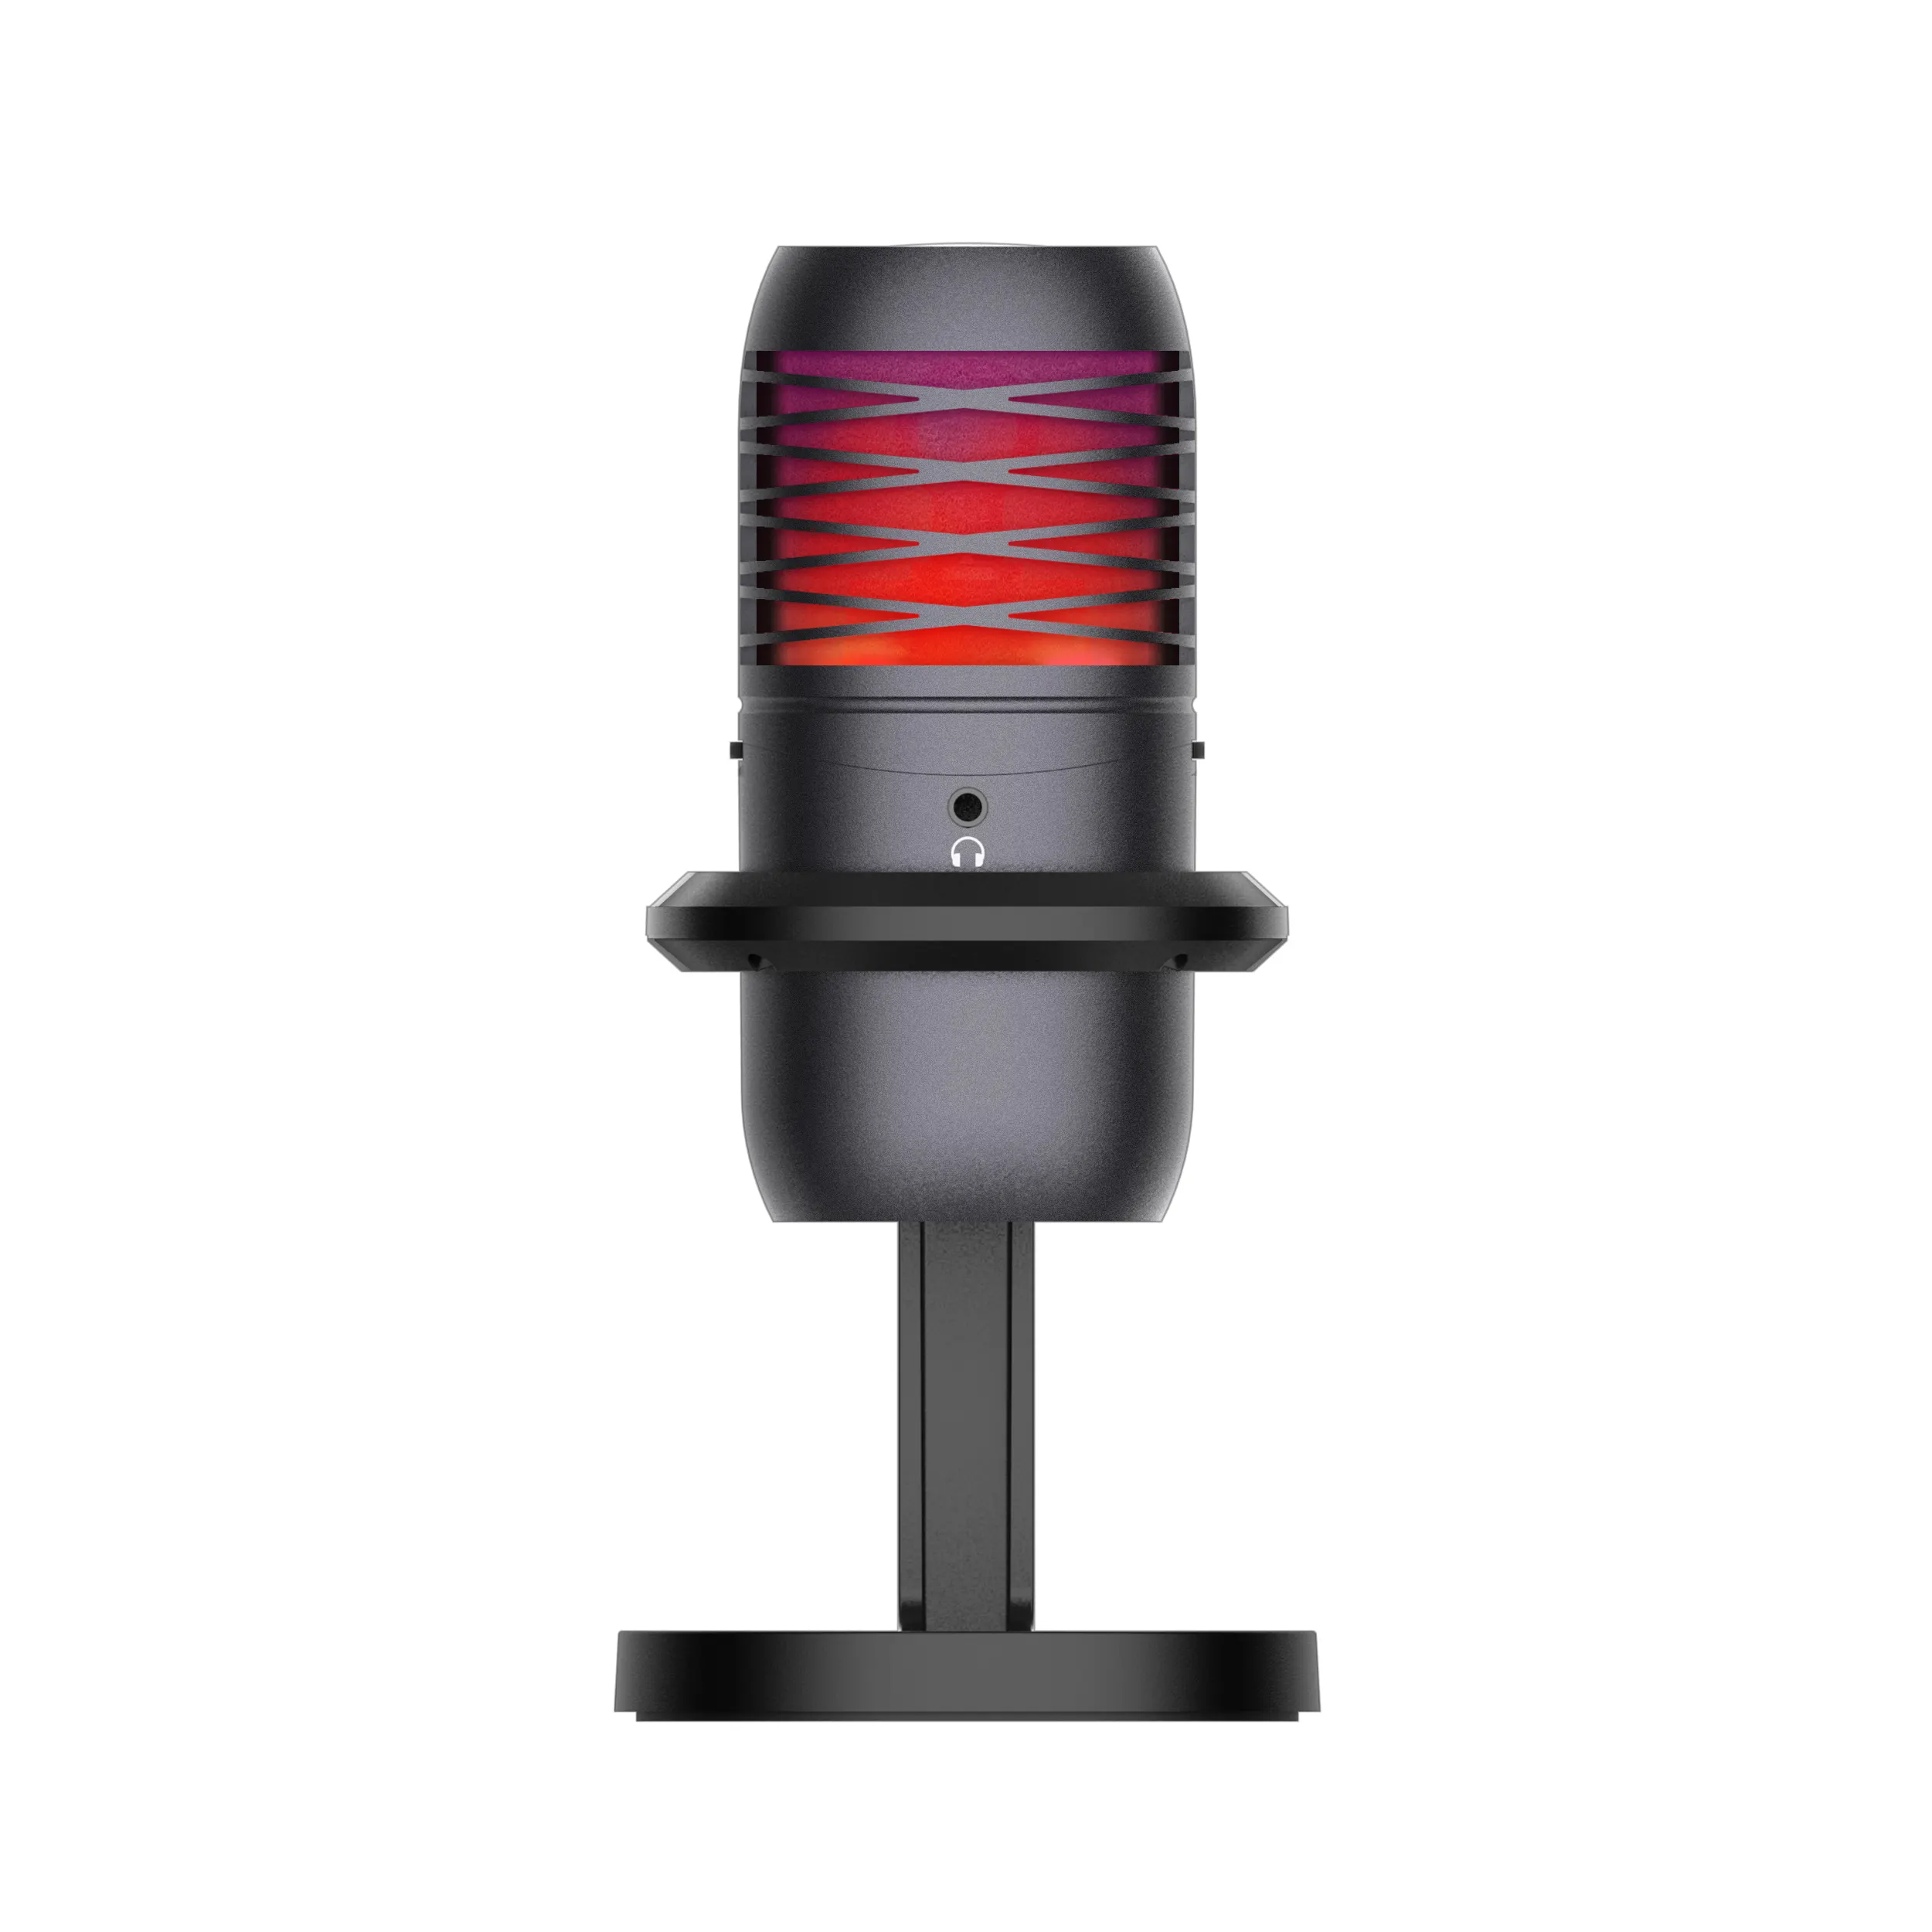 Rhythm Pick up Lights effect microphone 96Khz Noise cancelling Logo projection Conference Streaming podcast Stereo microphone